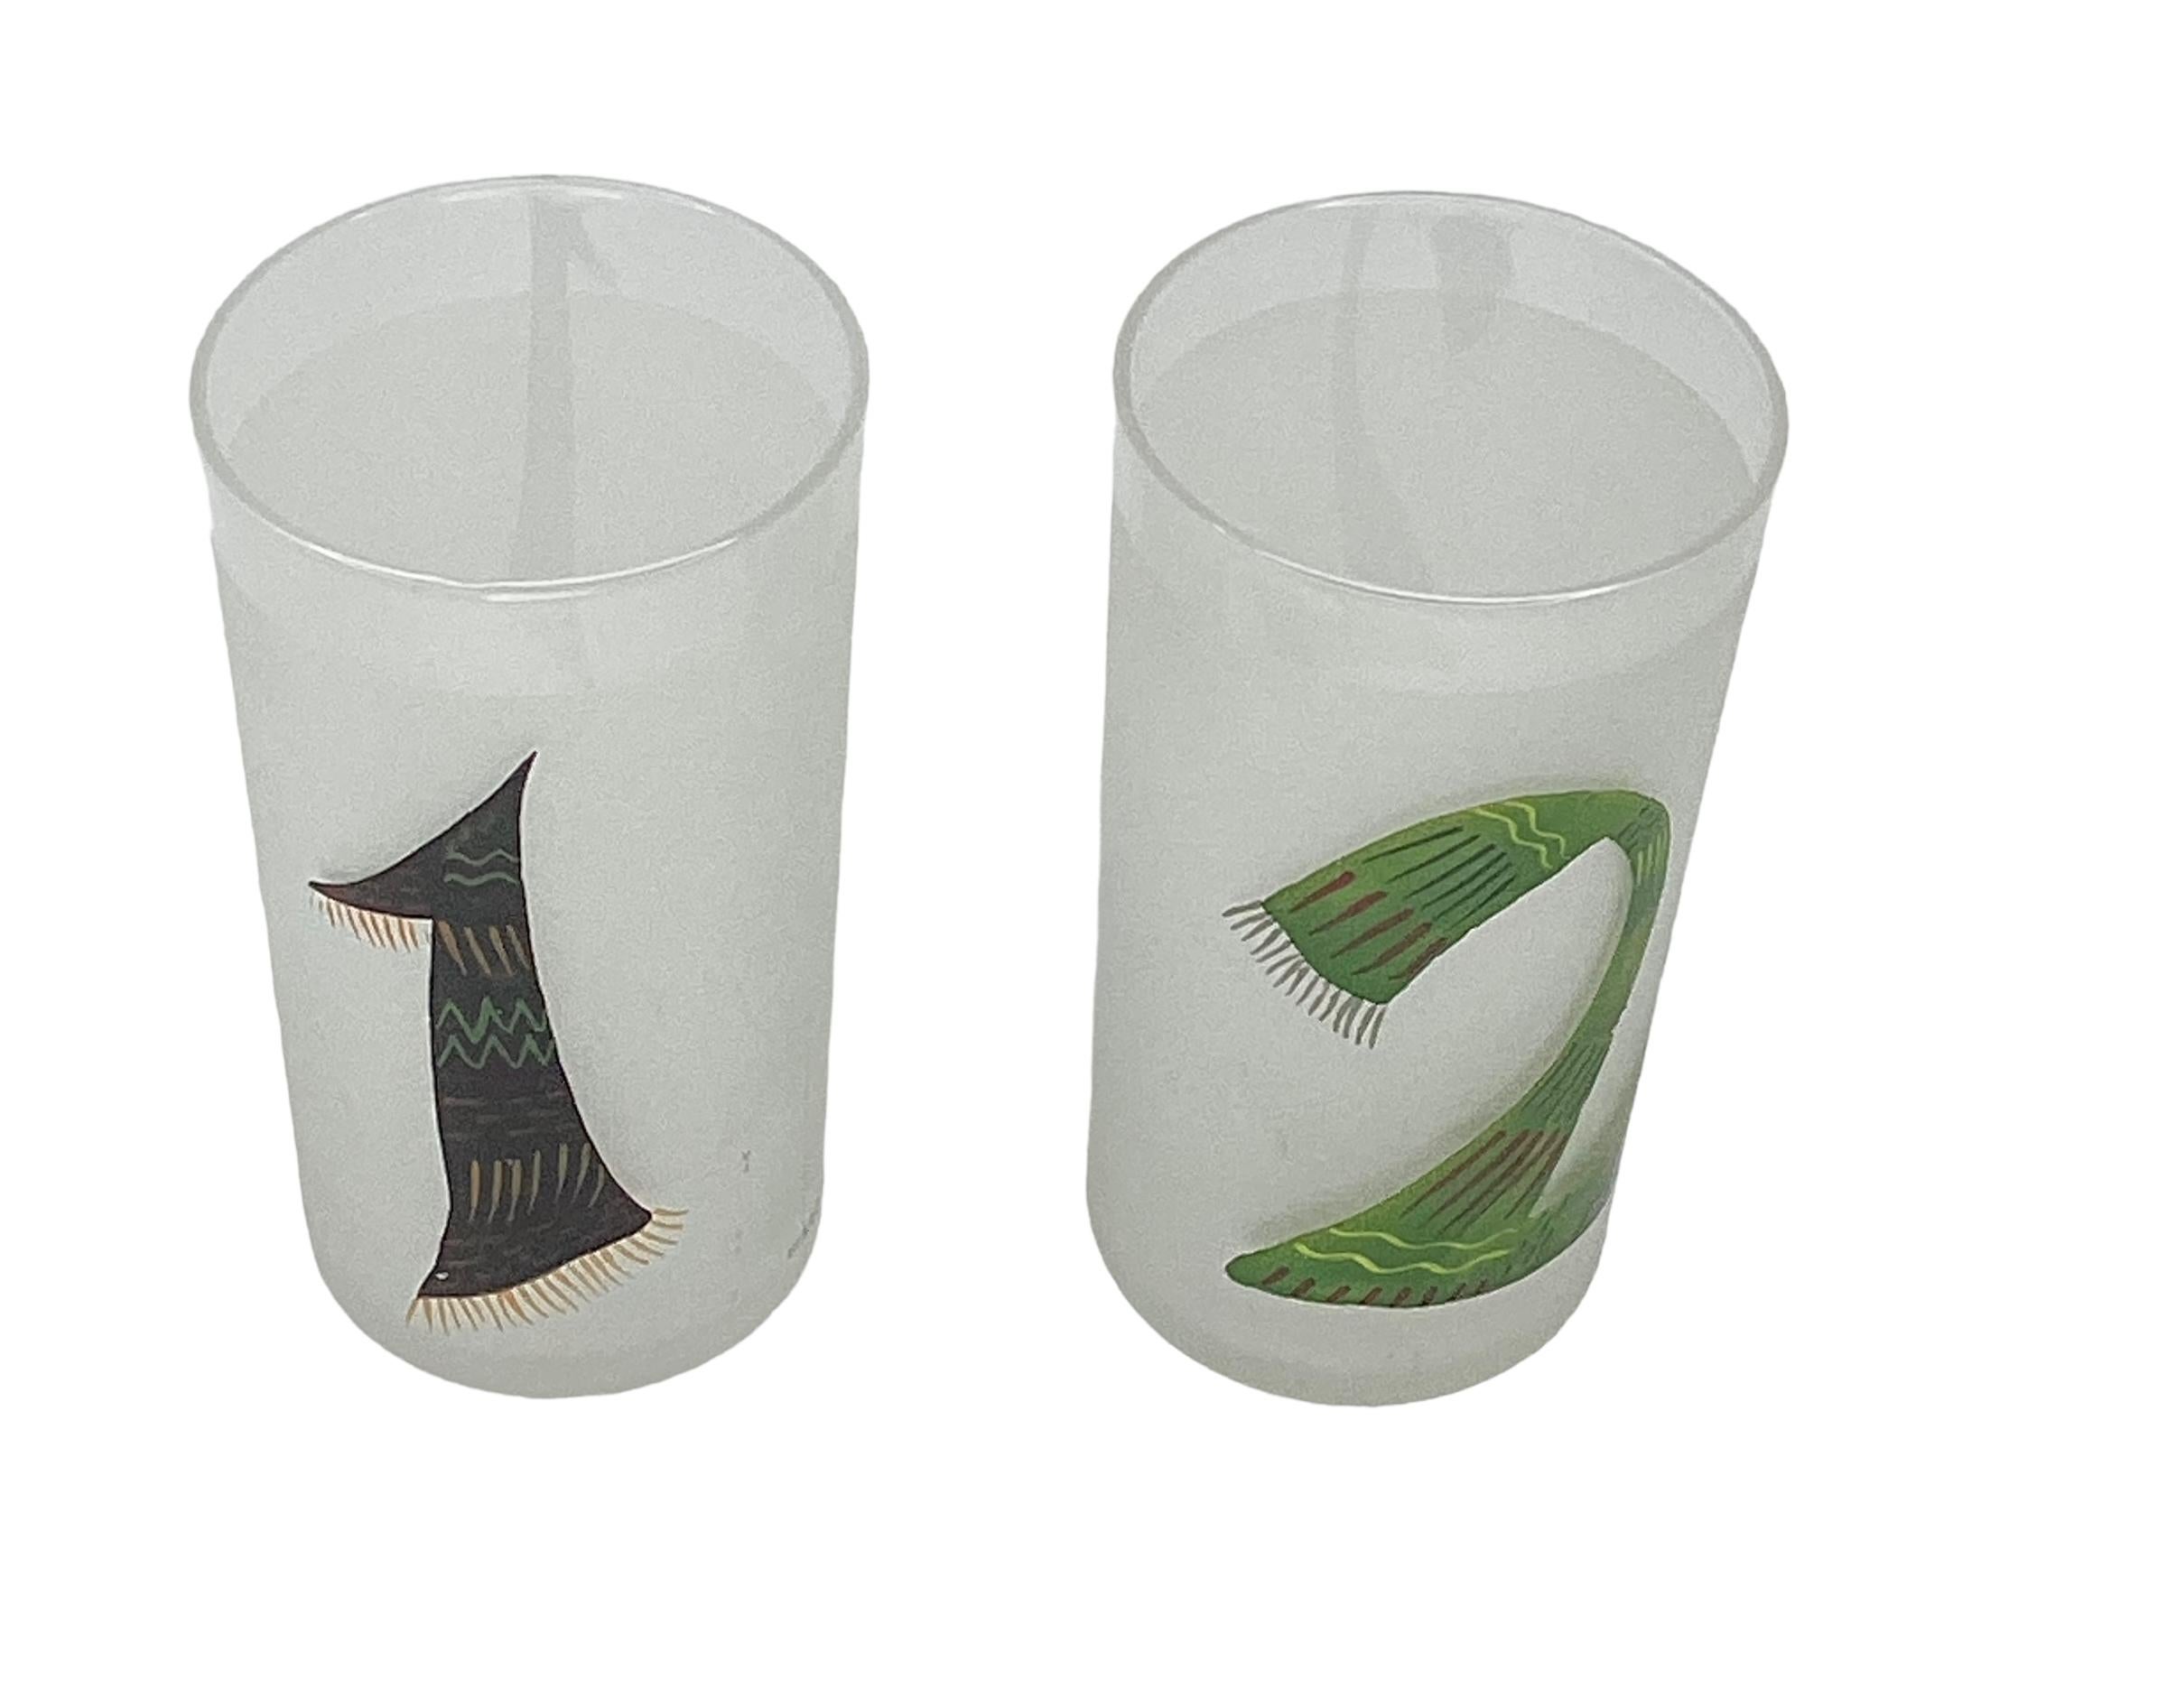 Set of 8 Frosted Vintage Tumblers Numbered 1-8. Each with a frosted background with a different colored scarf forming each number. The number 